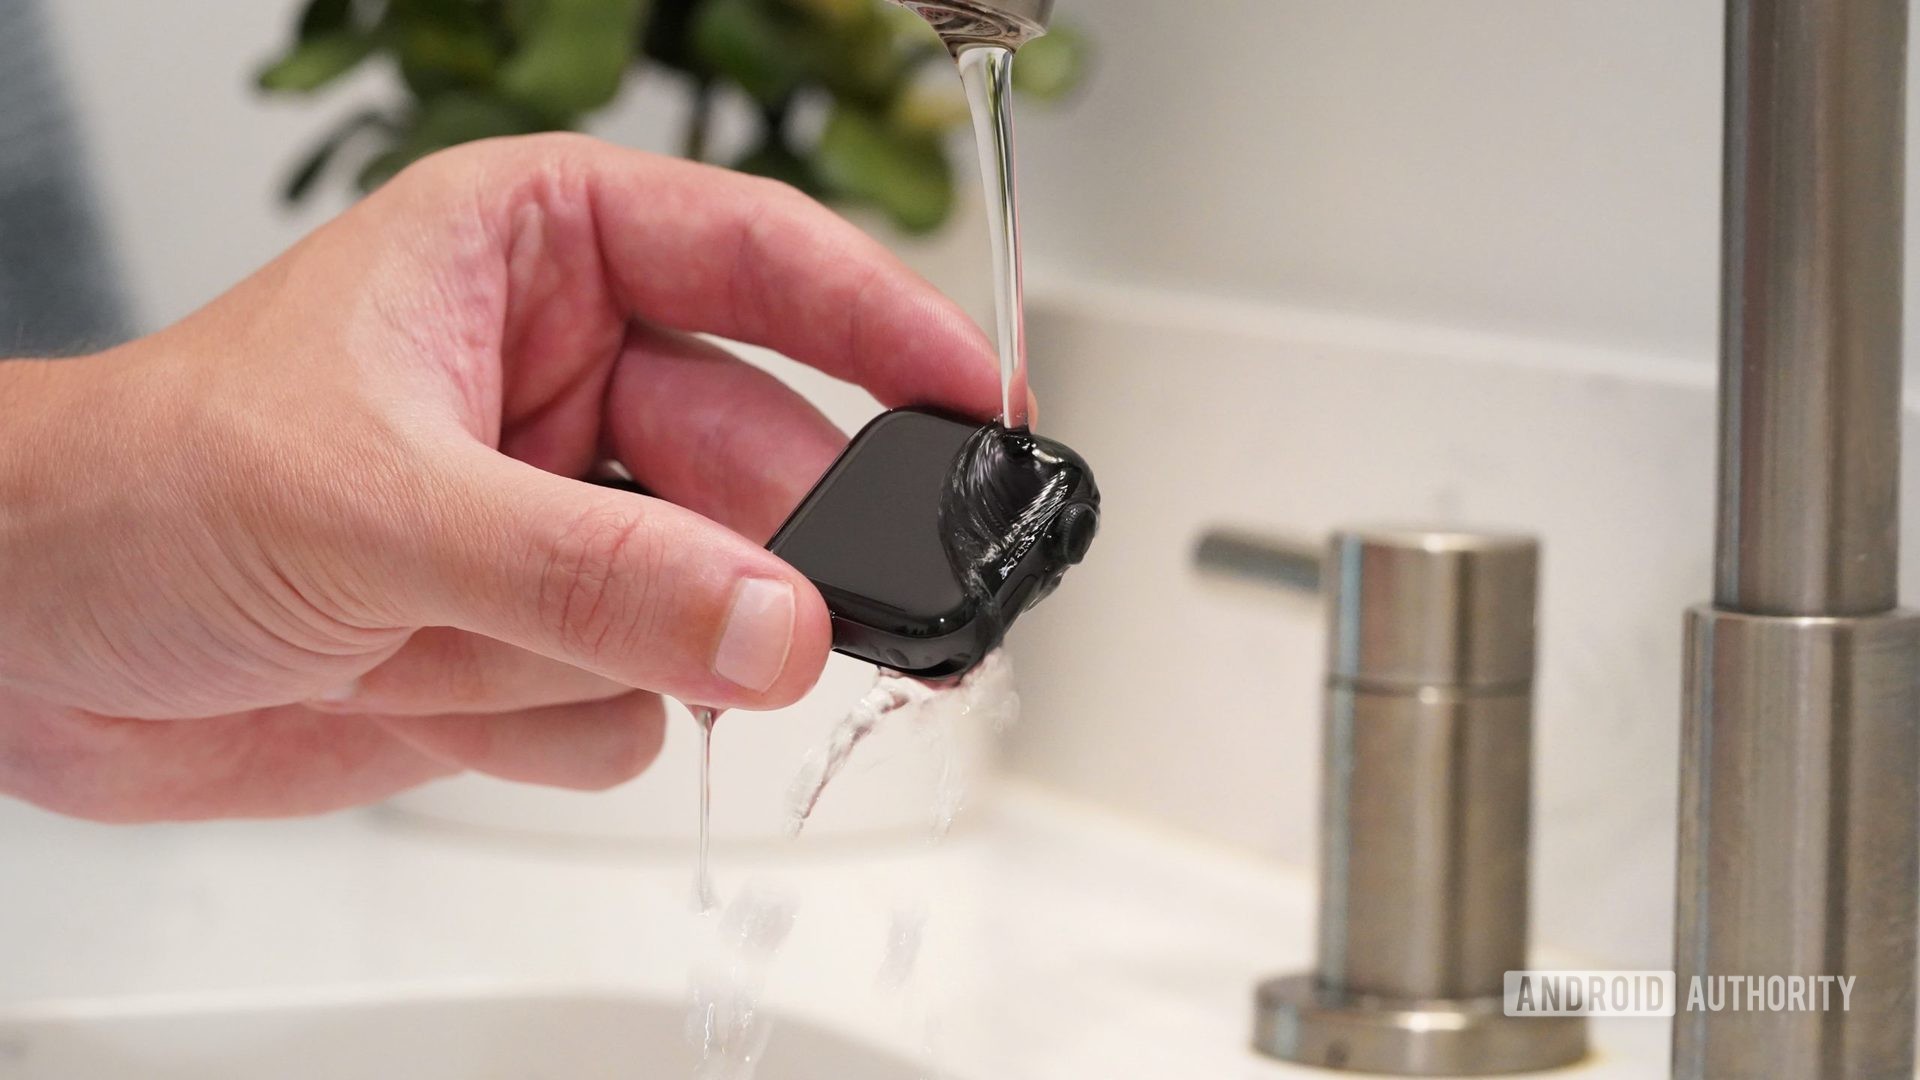 The male hand places the Apple Watch Series 6 under warm water with a low flow rate to clean the device.